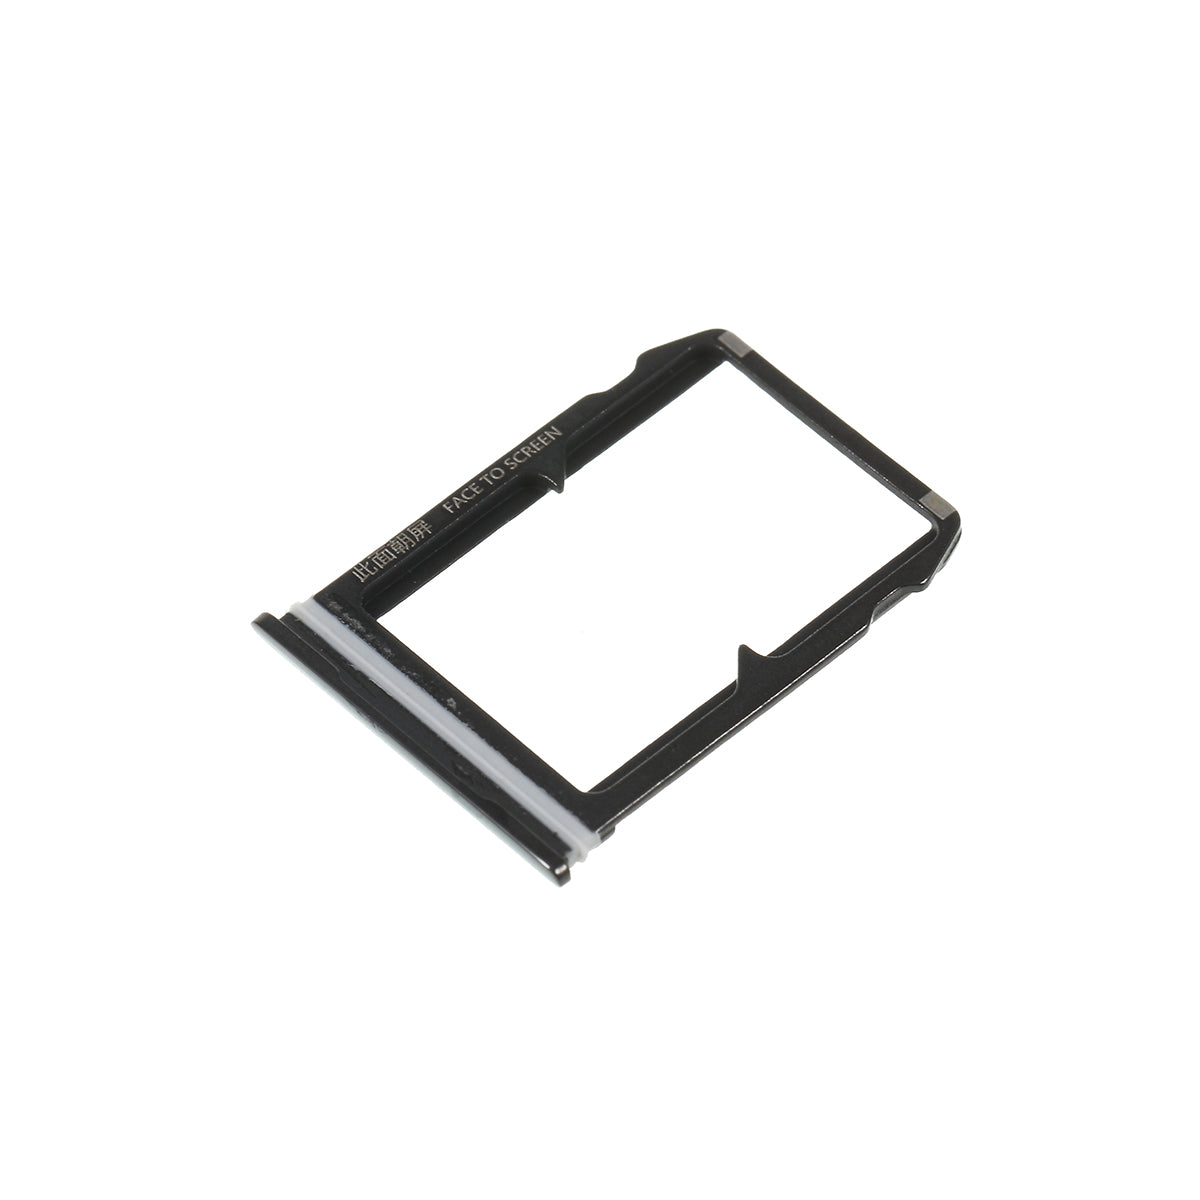 OEM Dual SIM Card Tray Holder Replace Part for Xiaomi Mi 6 - Black